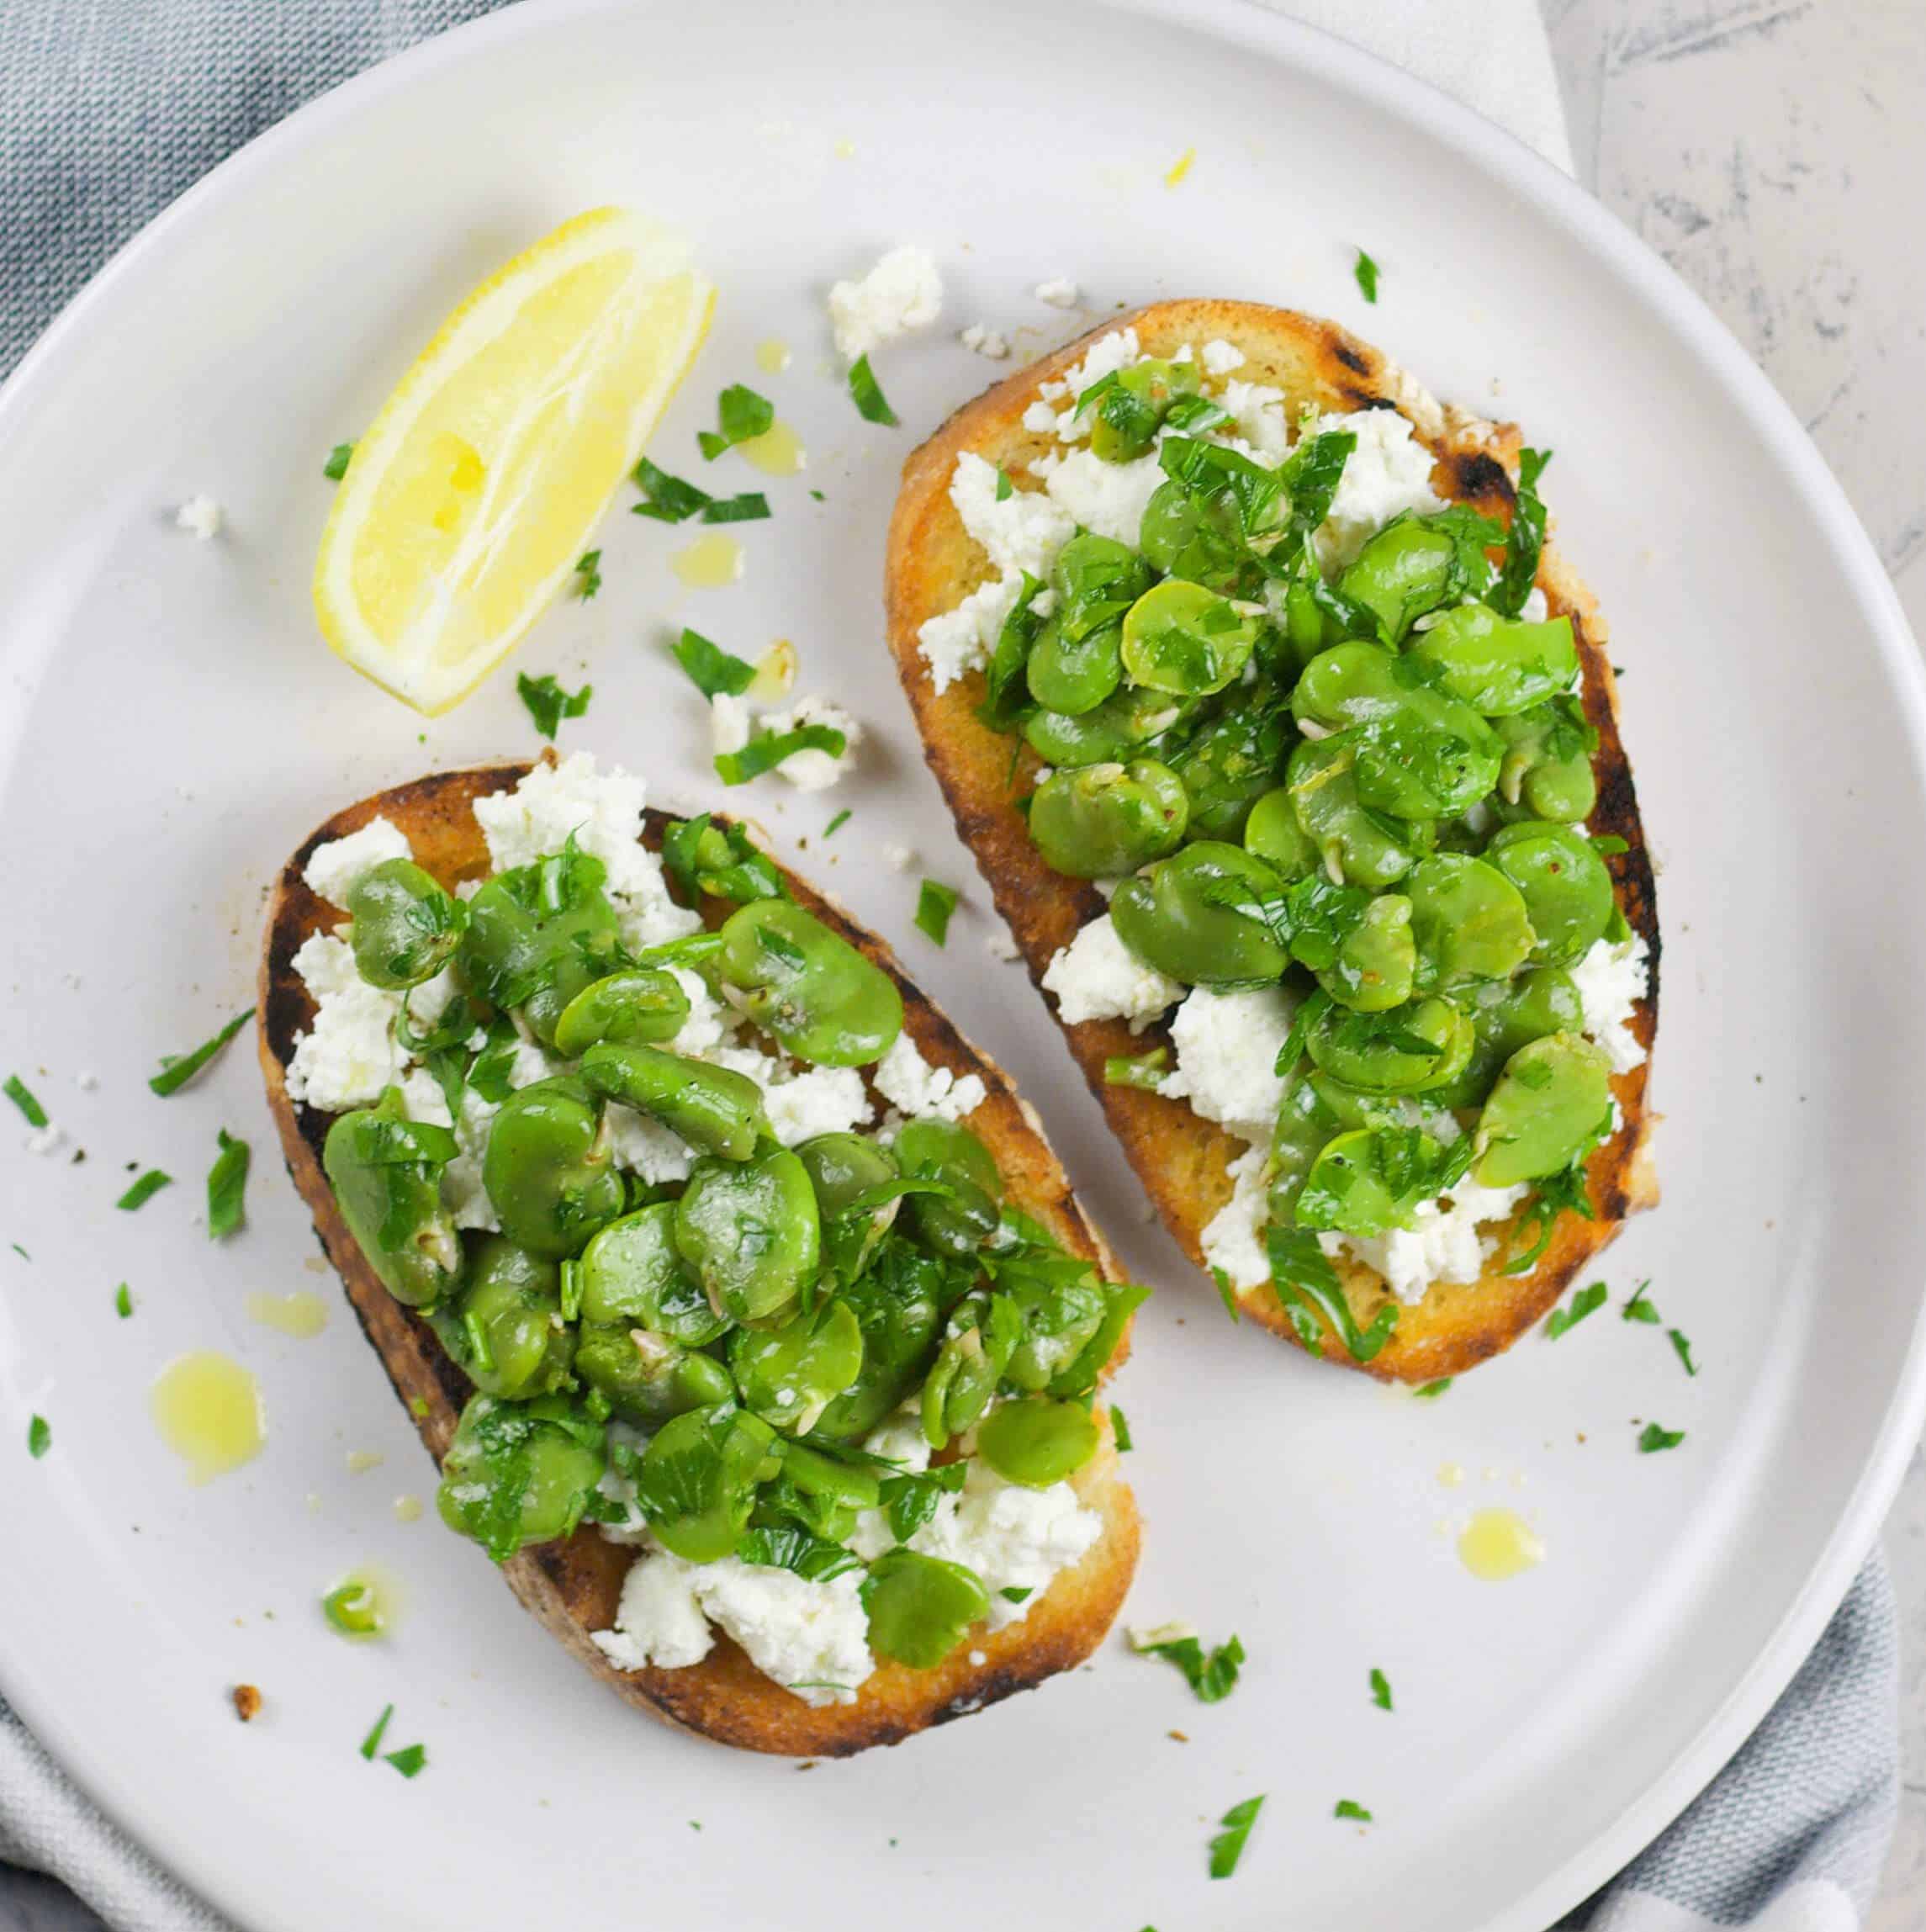 Garlic toast with broad beans and goat cheese